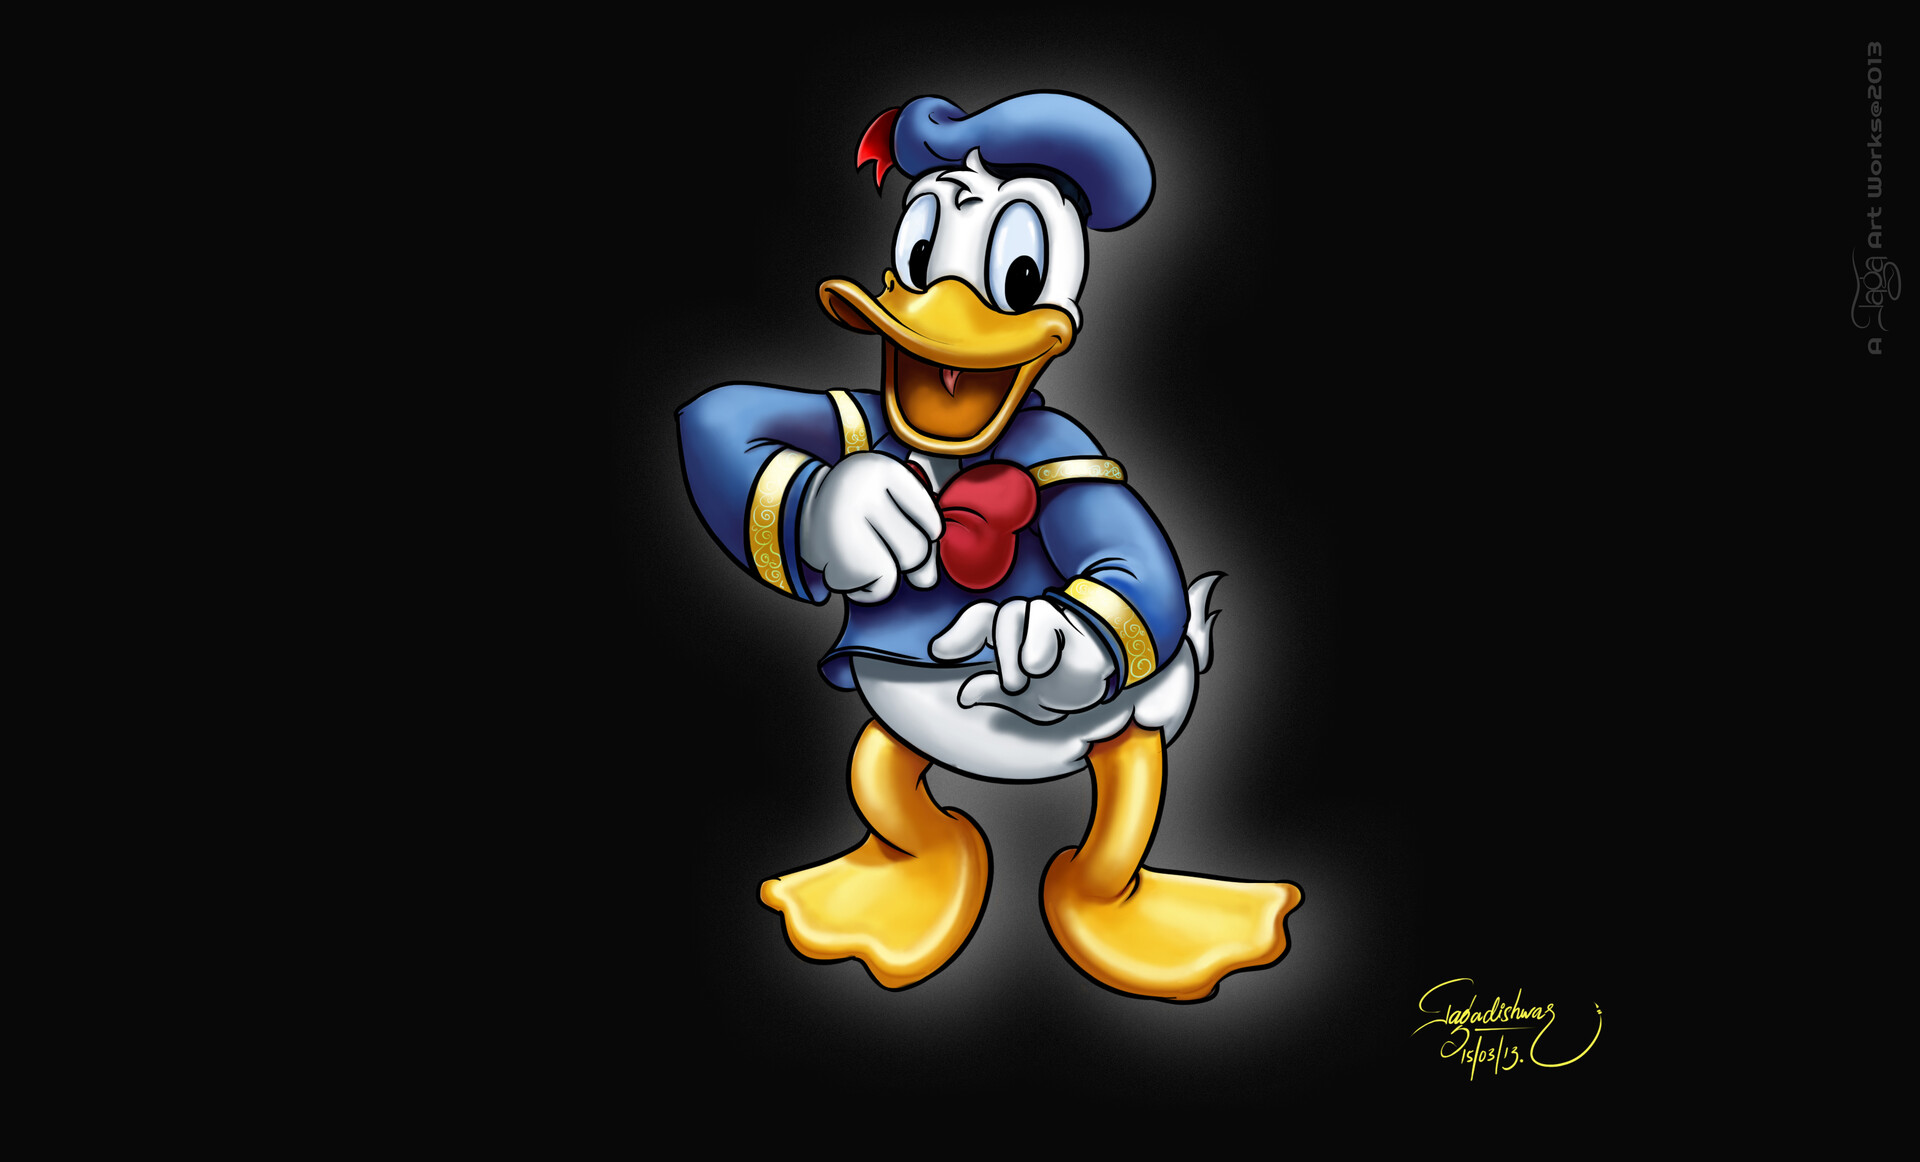 ArtStation - Donald duck cartoon character practice work, Done in the year  2013